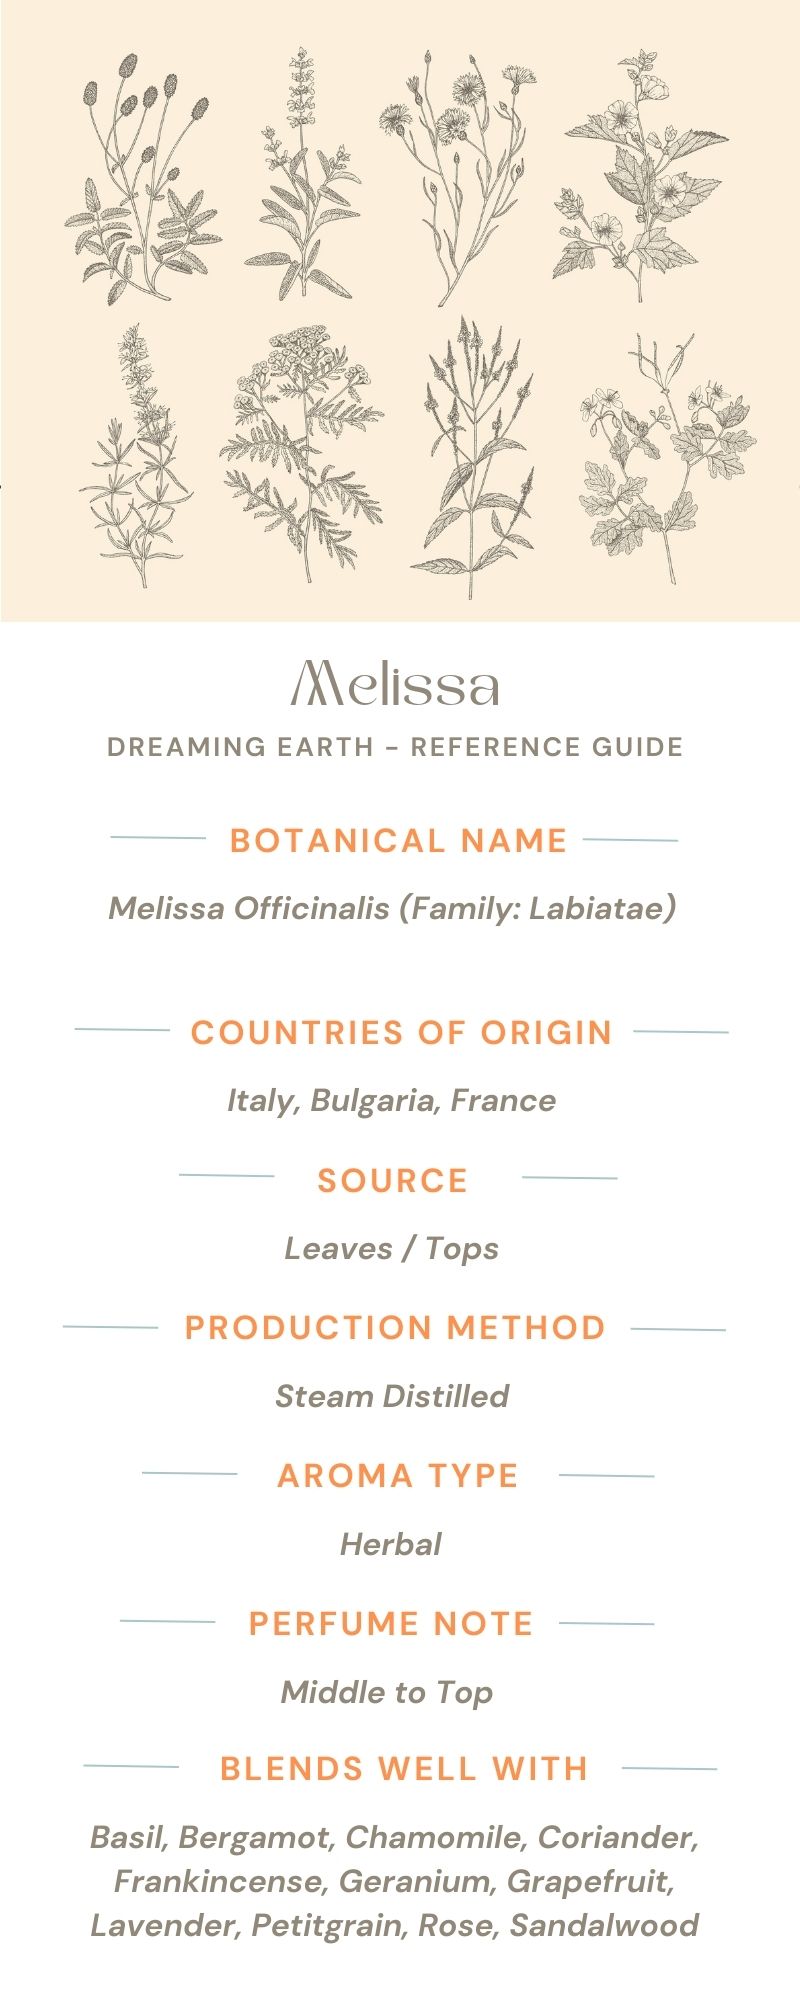 Load image into Gallery viewer, Melissa Essential Oil - Dreaming Earth Inc
